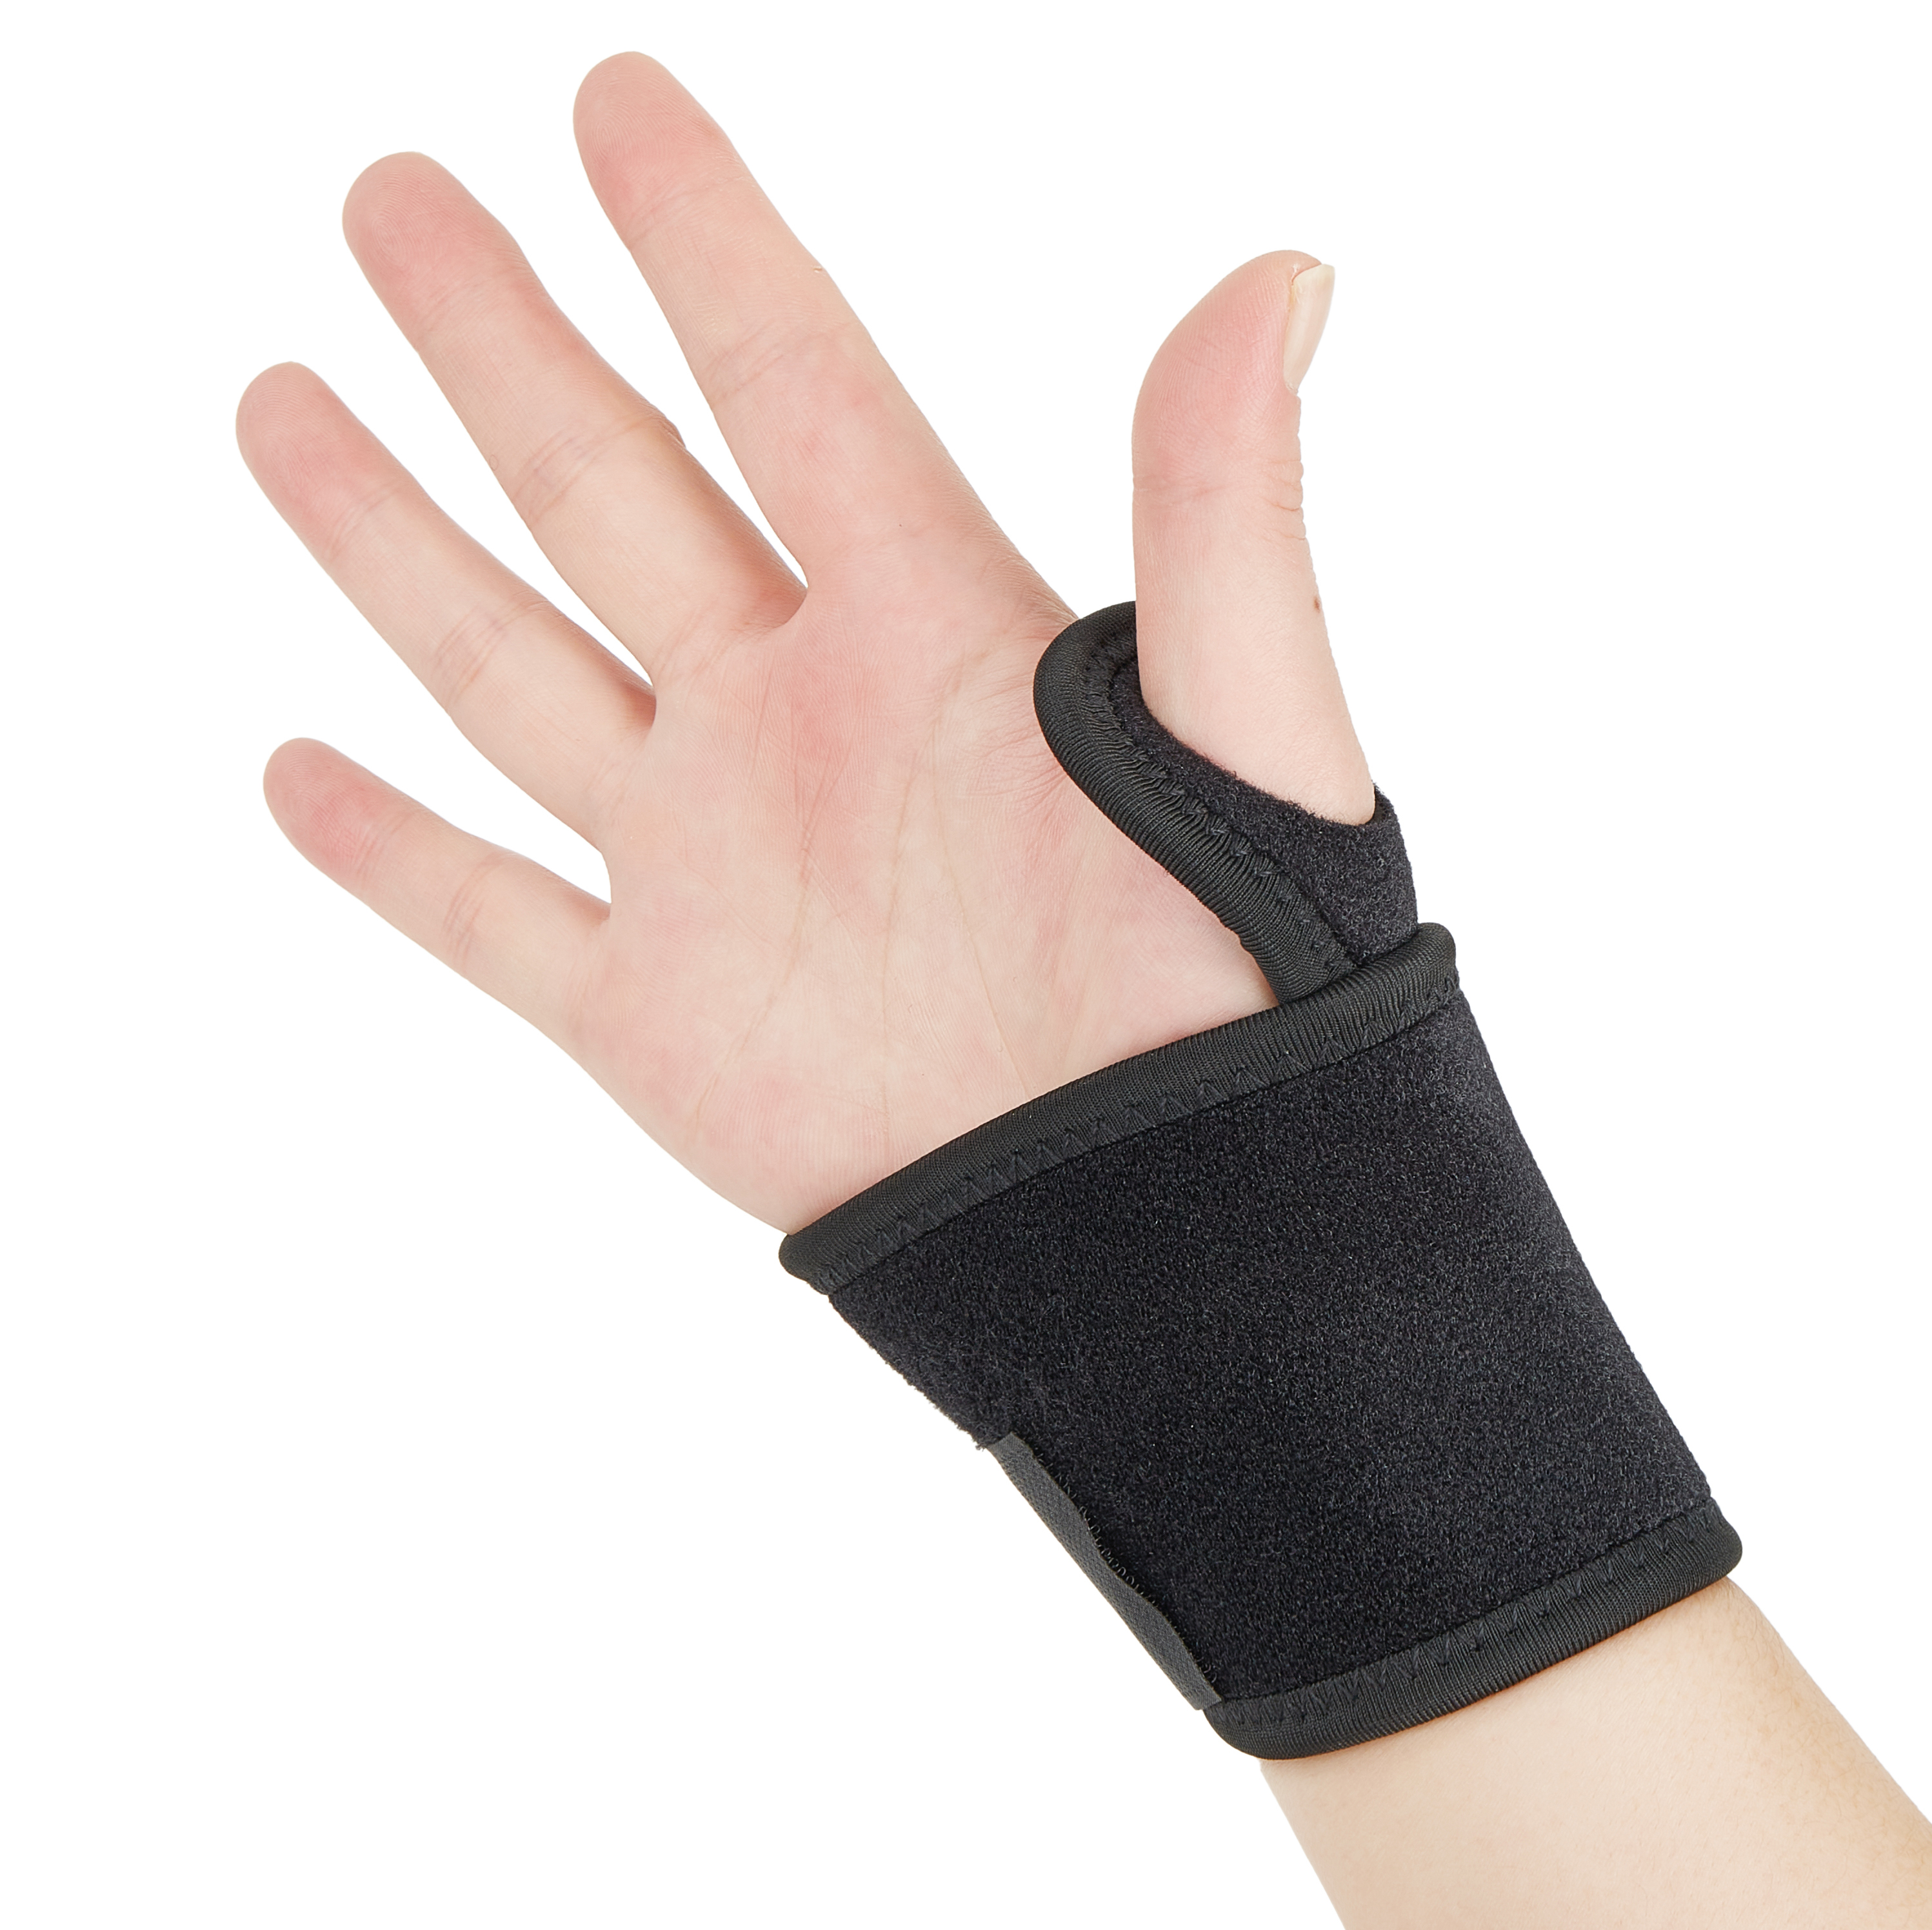 Workout Exercise Wrist Guards for gym